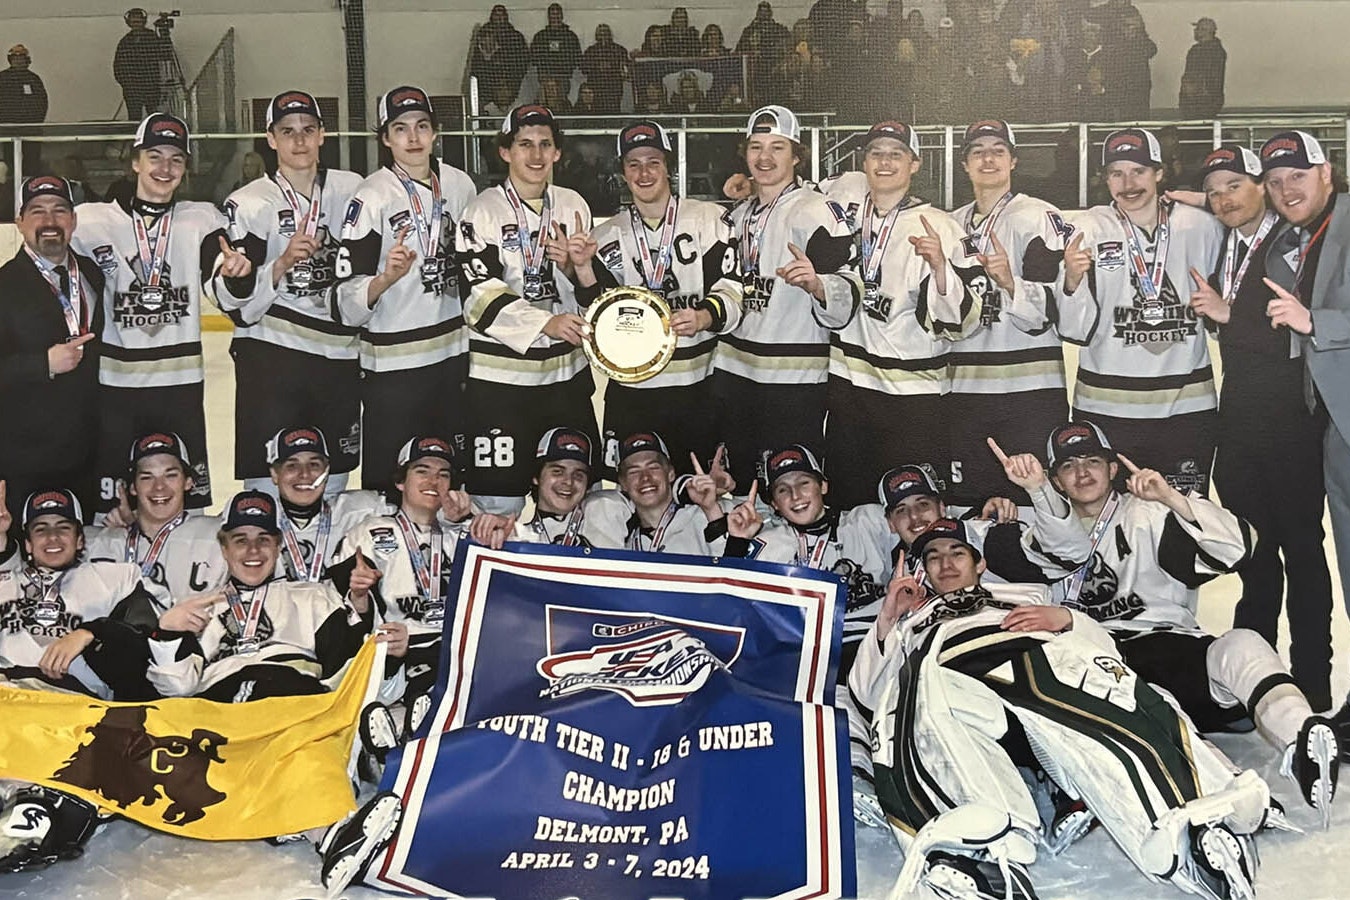 Team Wyoming’s 18U AA team became the first national champions at their age level for the state.